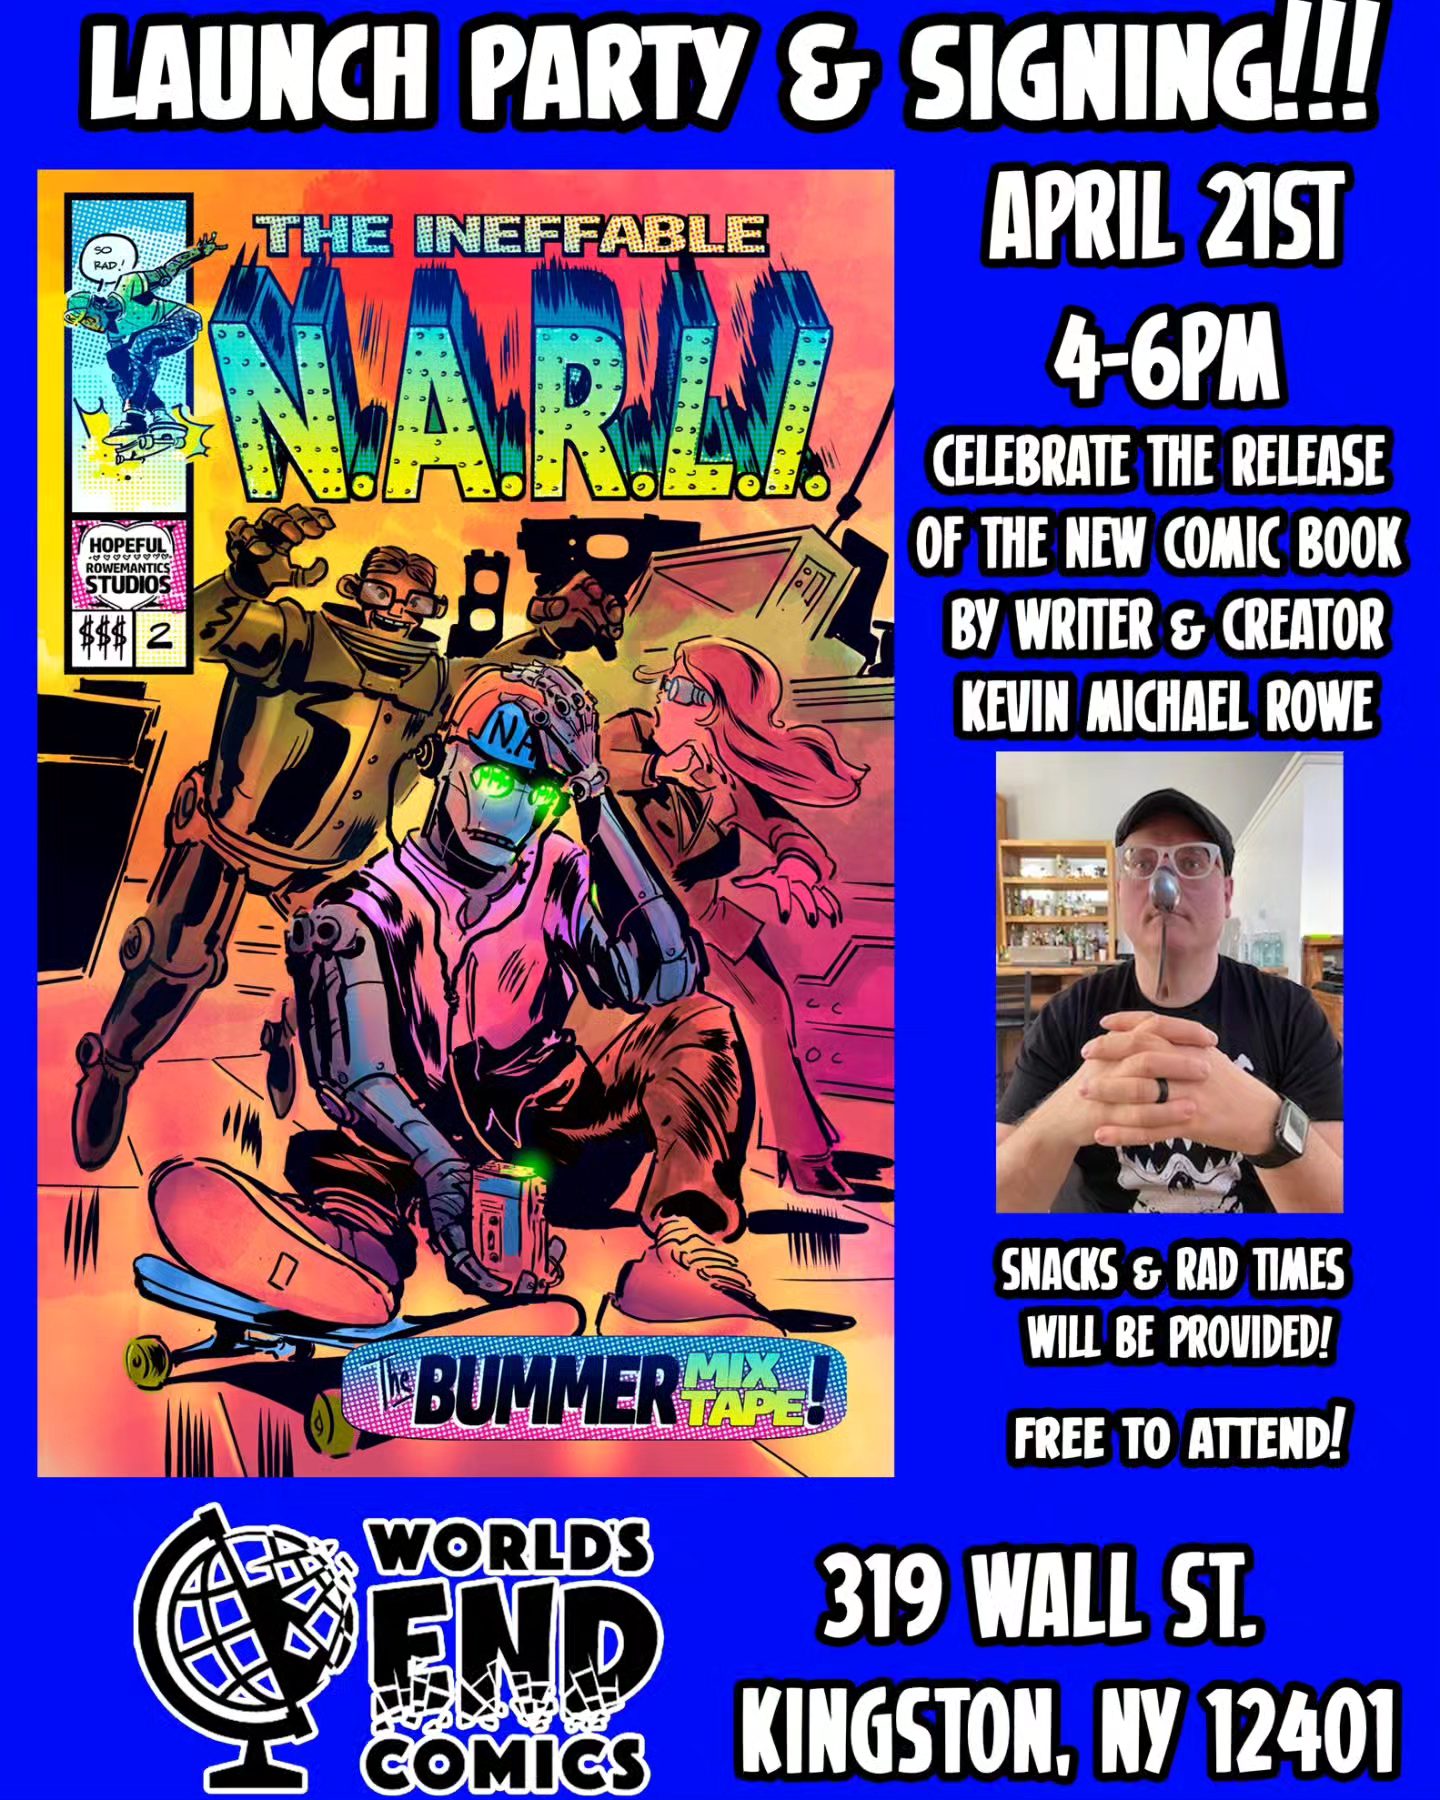 Comic Book Launch and Signing by Kevin Michael Rowe